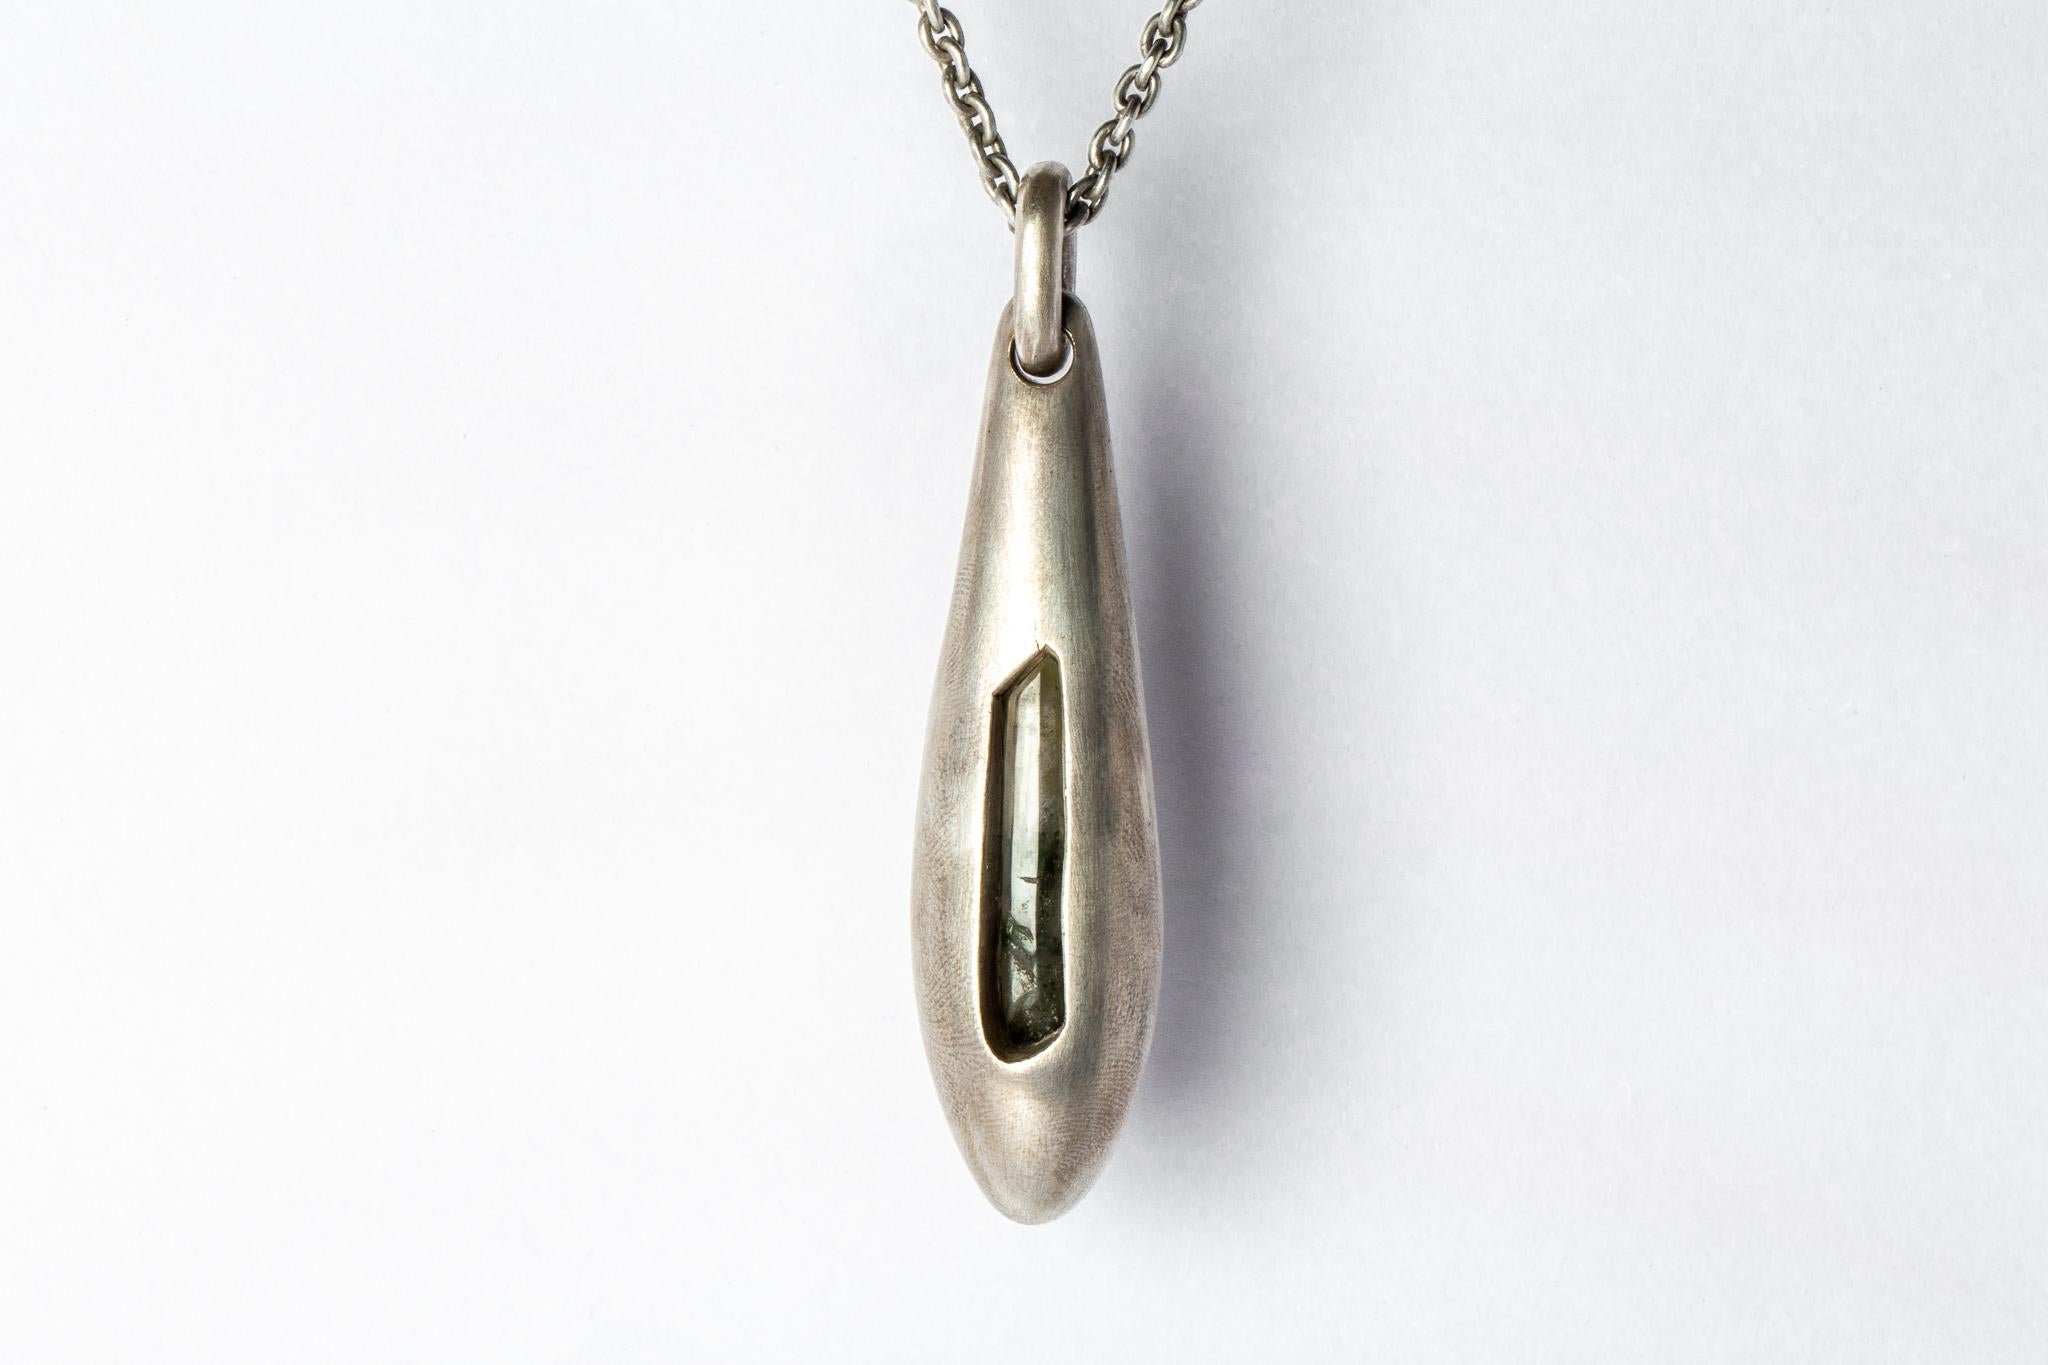 Pendant necklace made in acid treated sterling silver and a chlorite include quartz. It comes on 74 cm sterling silver chain.